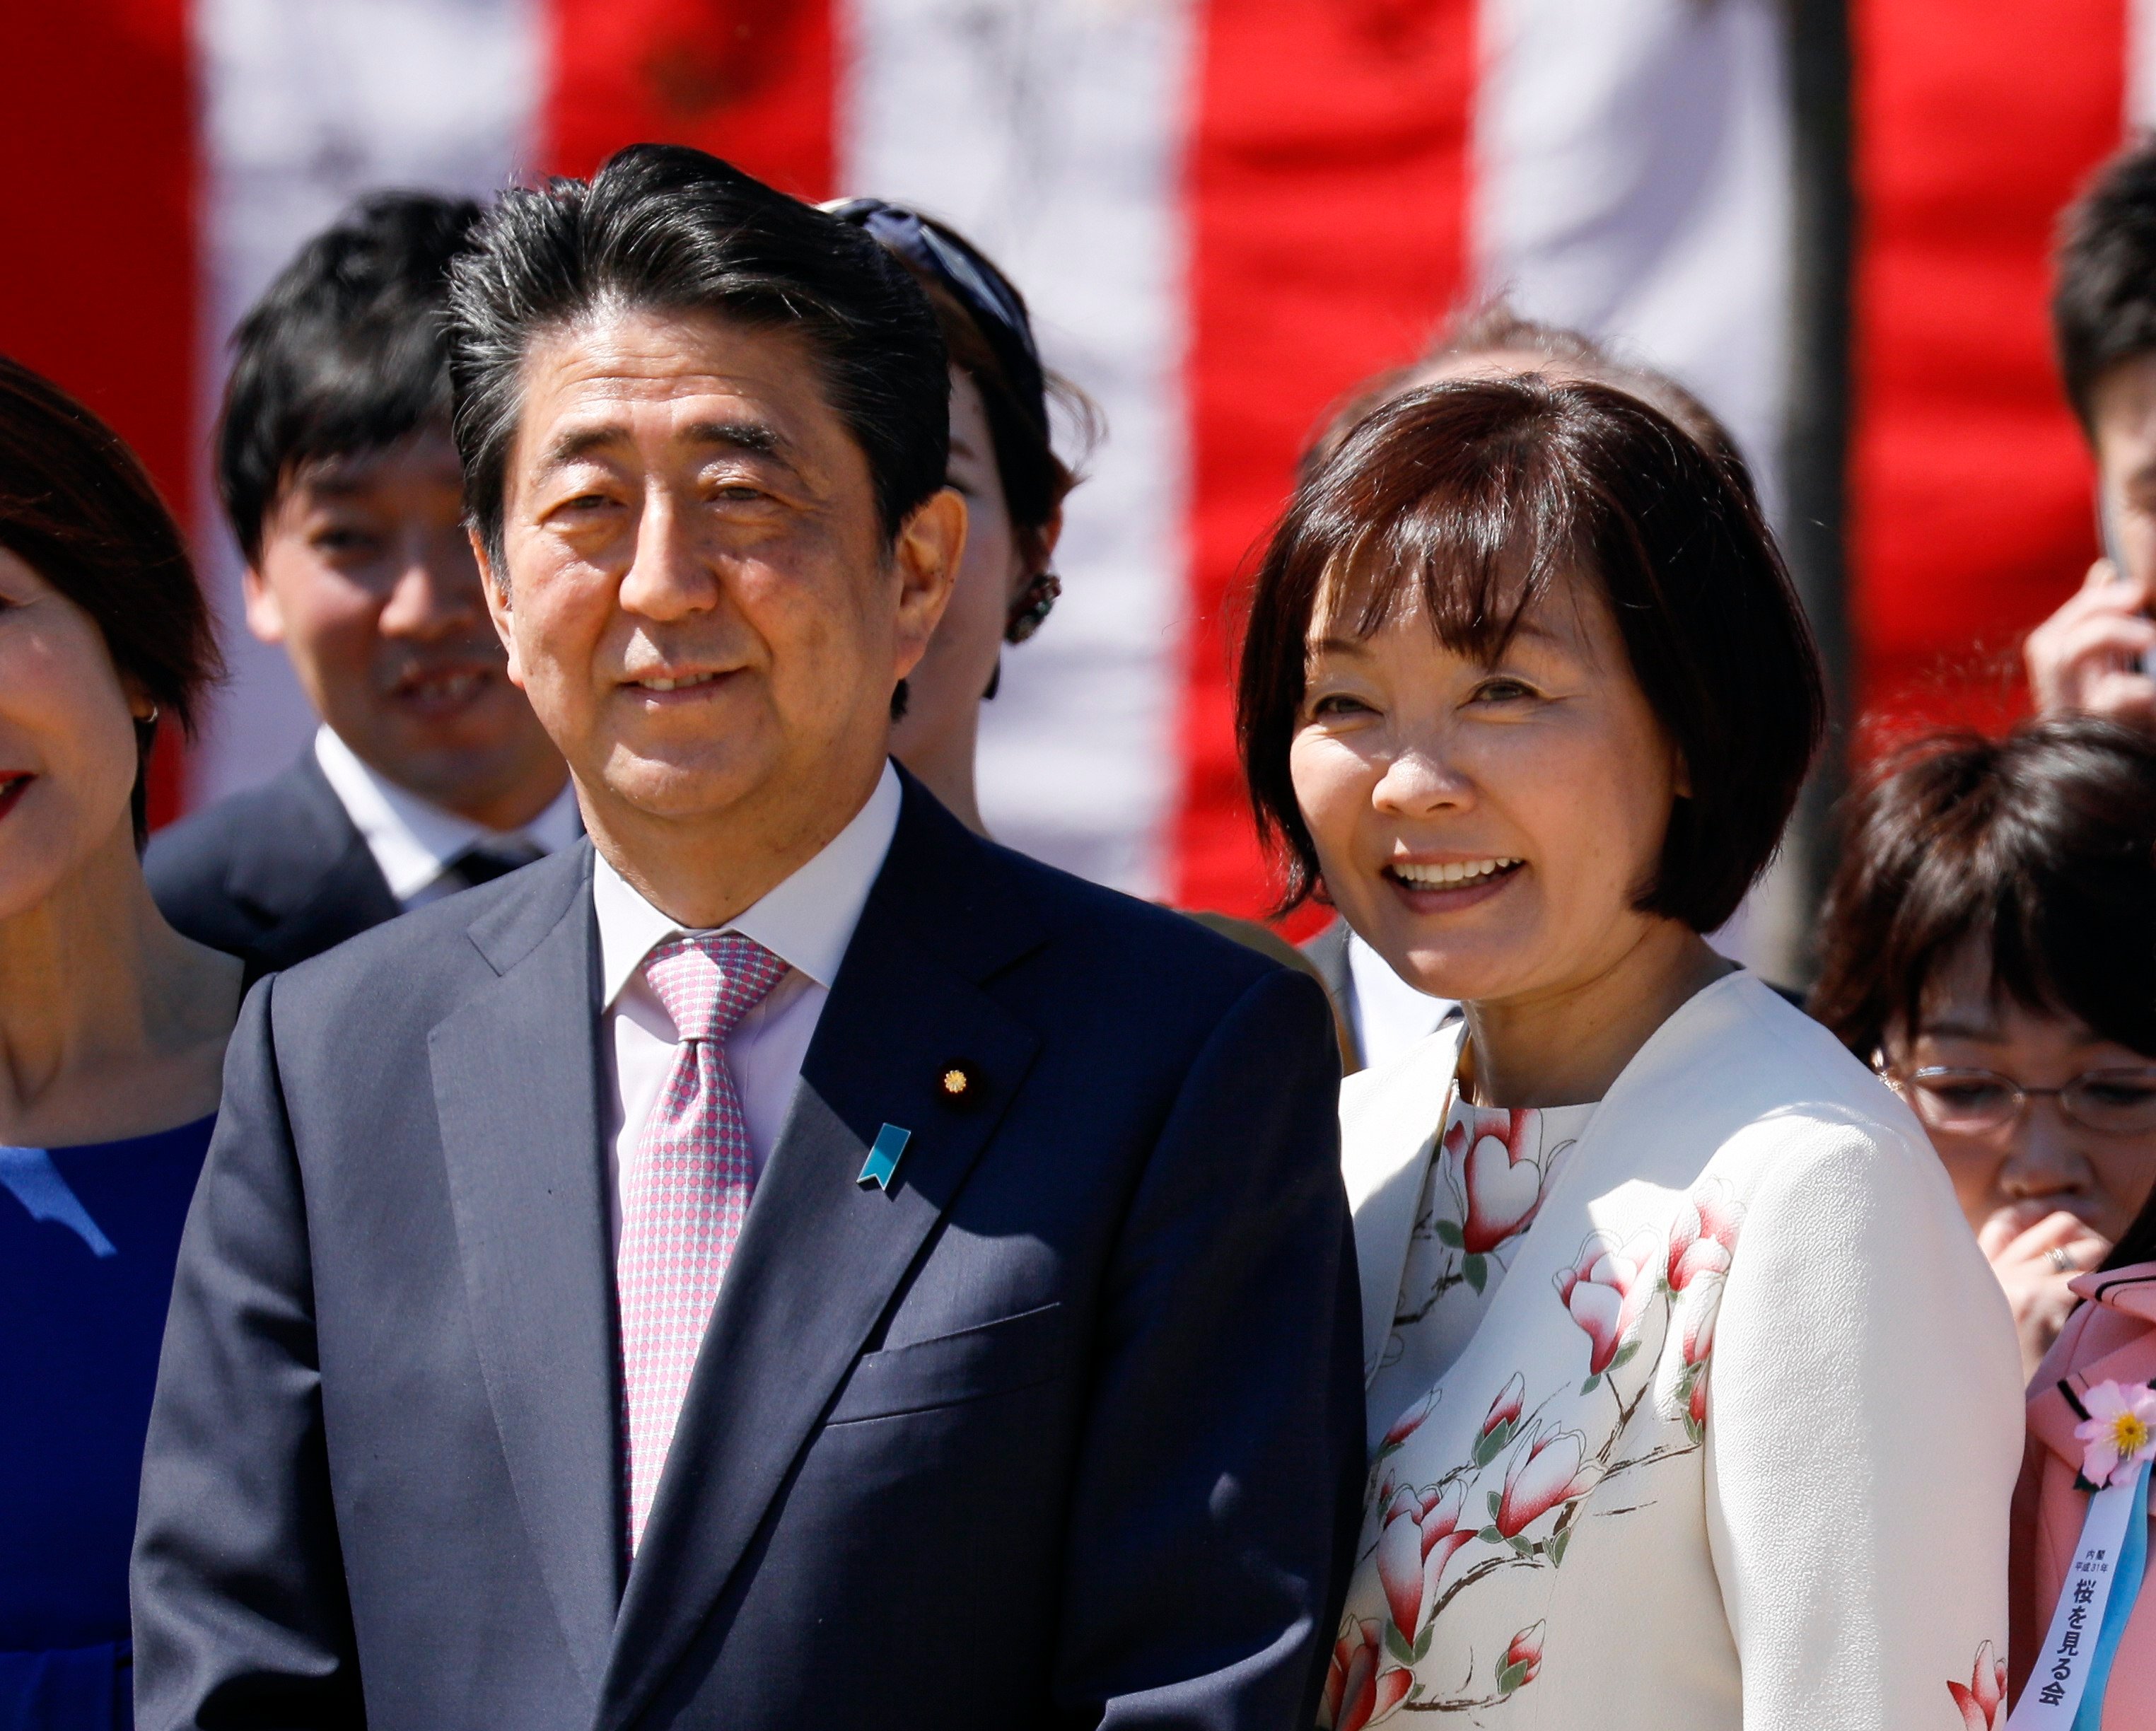 Late Japanese Prime Minister Shinzo Abe (L) and his wife Akie are seen during a cherry blossom viewing party in April 2019. Photo: EPA-EFE/File